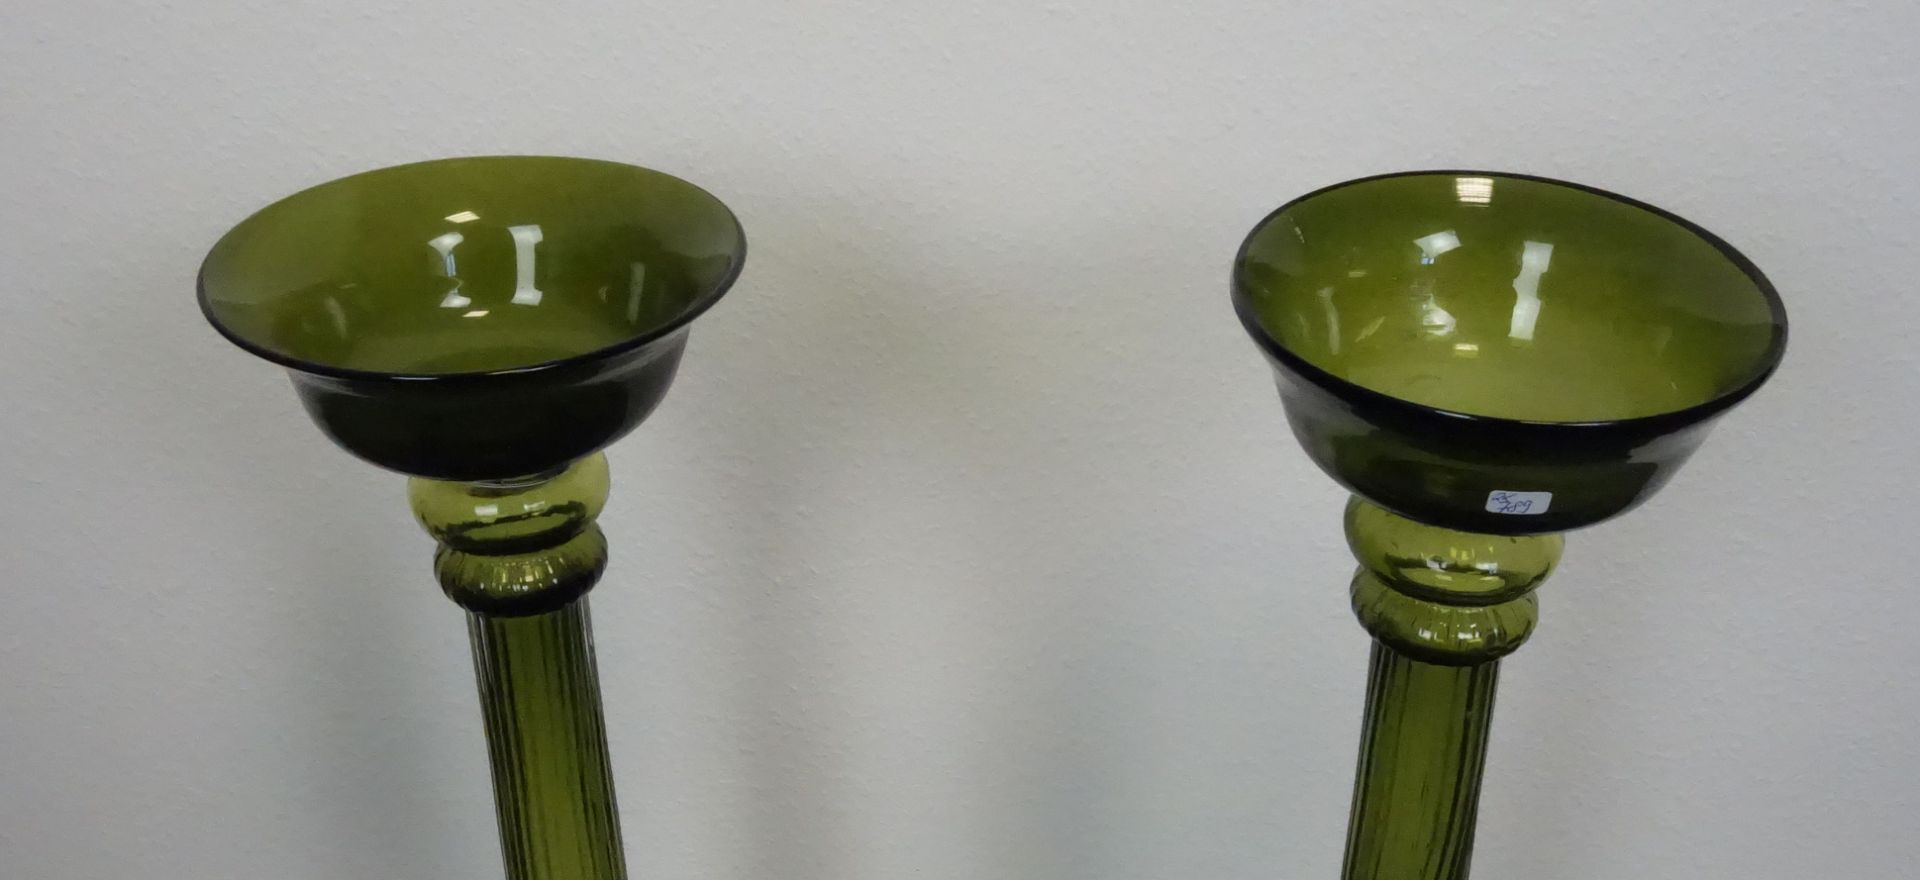 PAIR OF CANDLE STANDS - Image 2 of 2